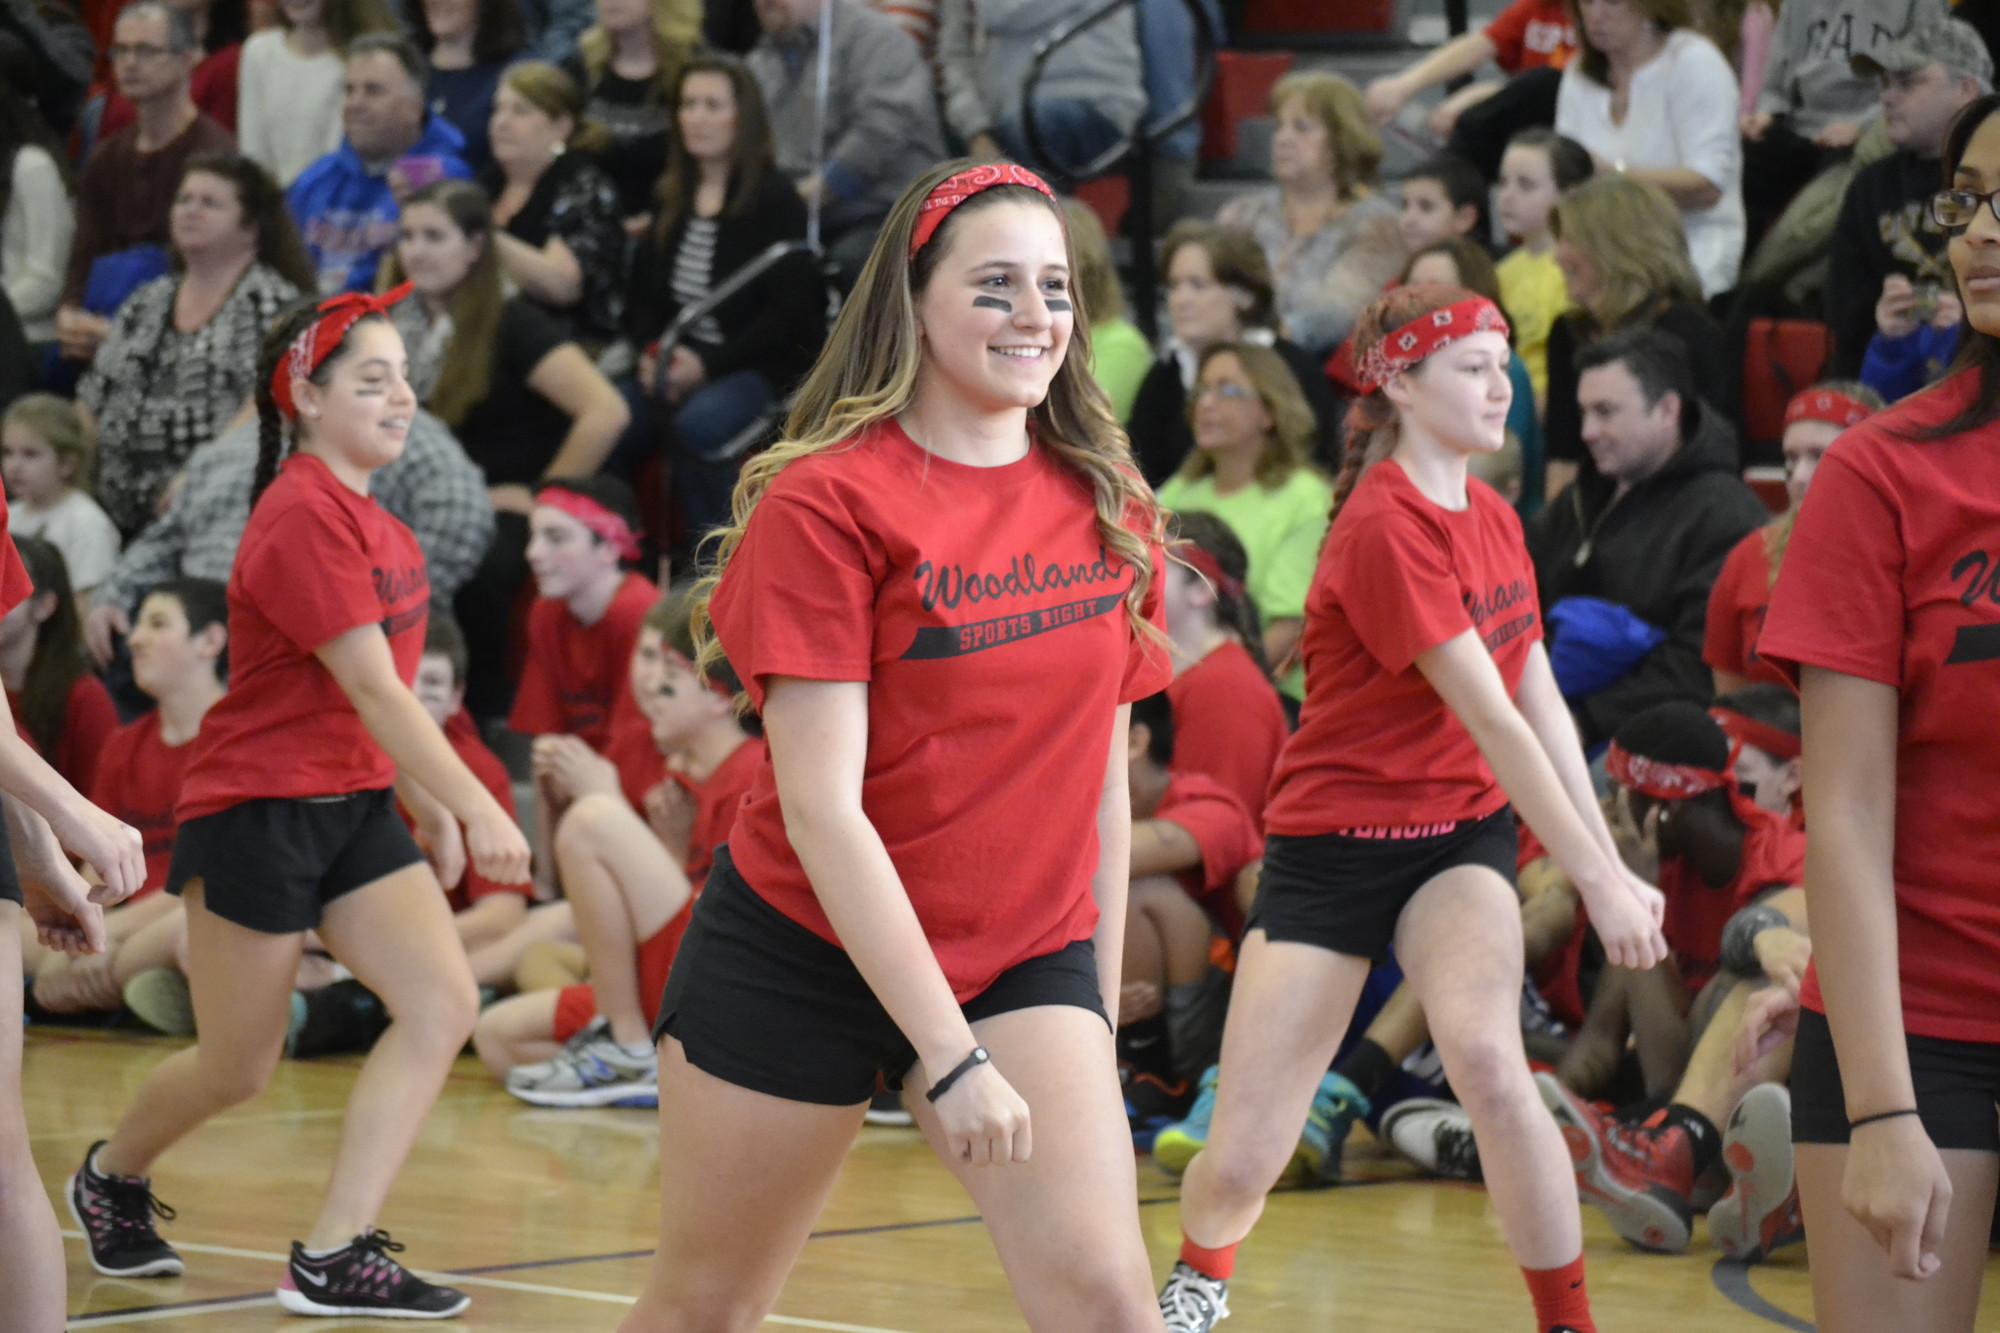 Amanda Hartman did some aerobics, one of the many events at Woodland Middle School’s Sports Night last Thursday.